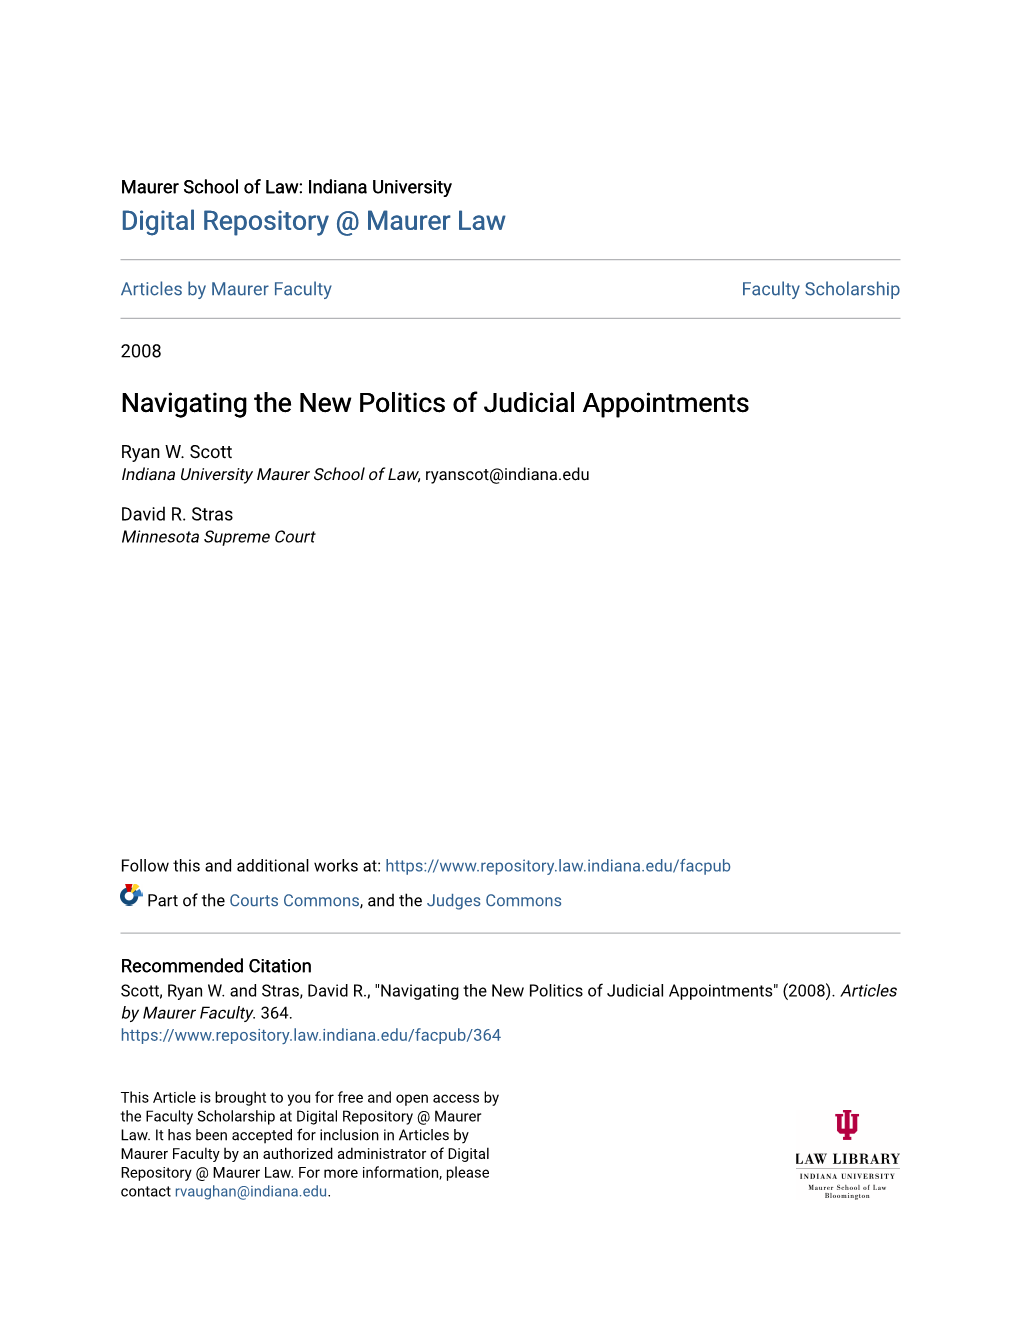 Navigating the New Politics of Judicial Appointments